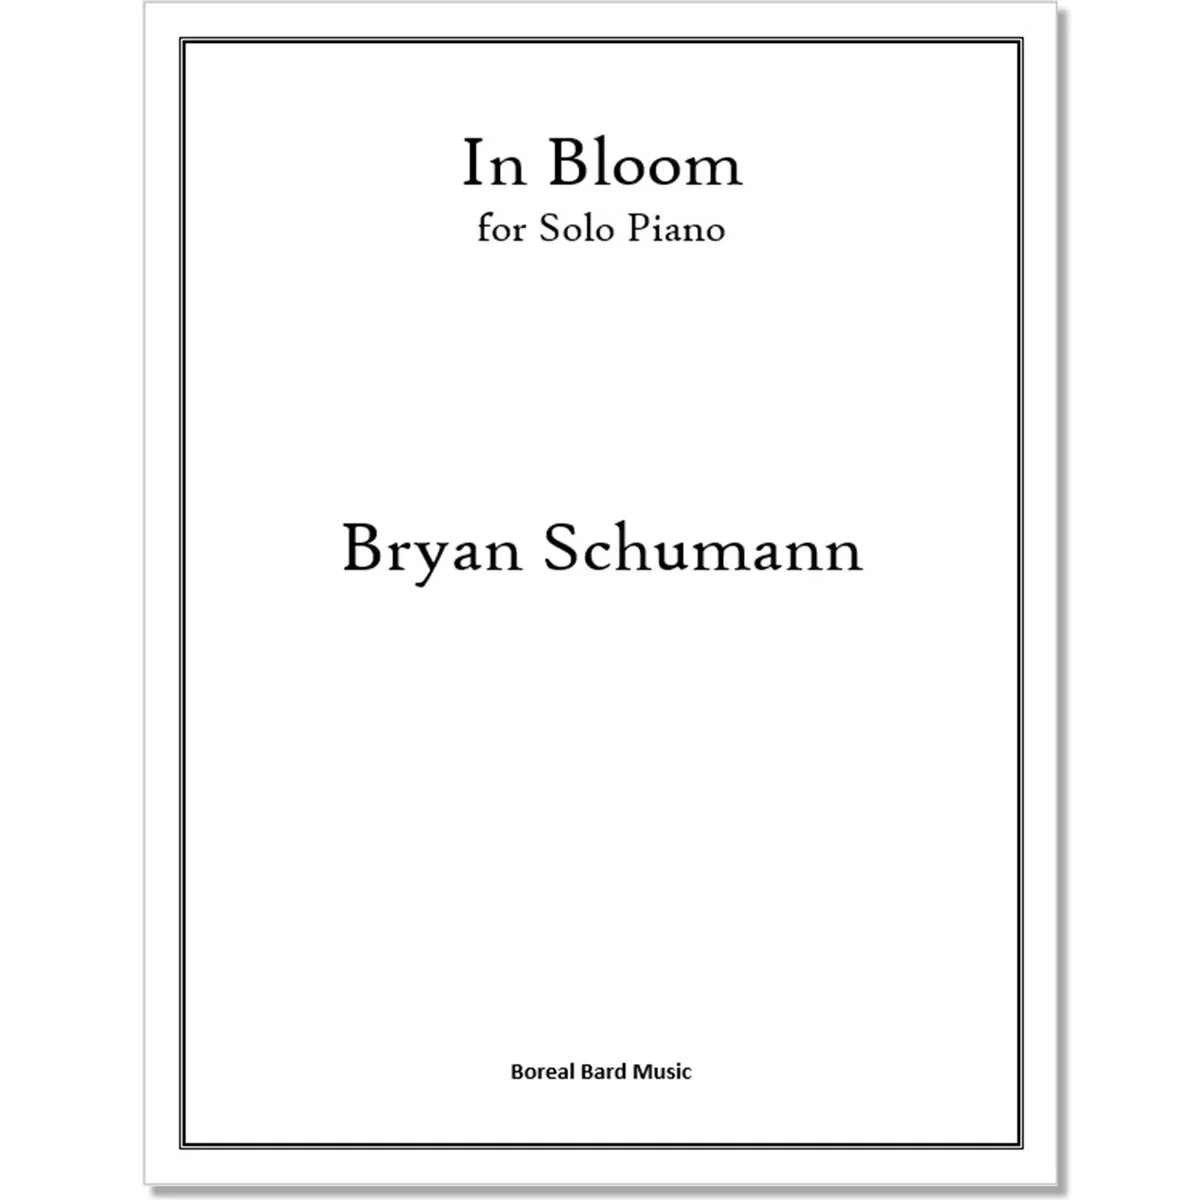 In Bloom for Solo Piano (sheet music)